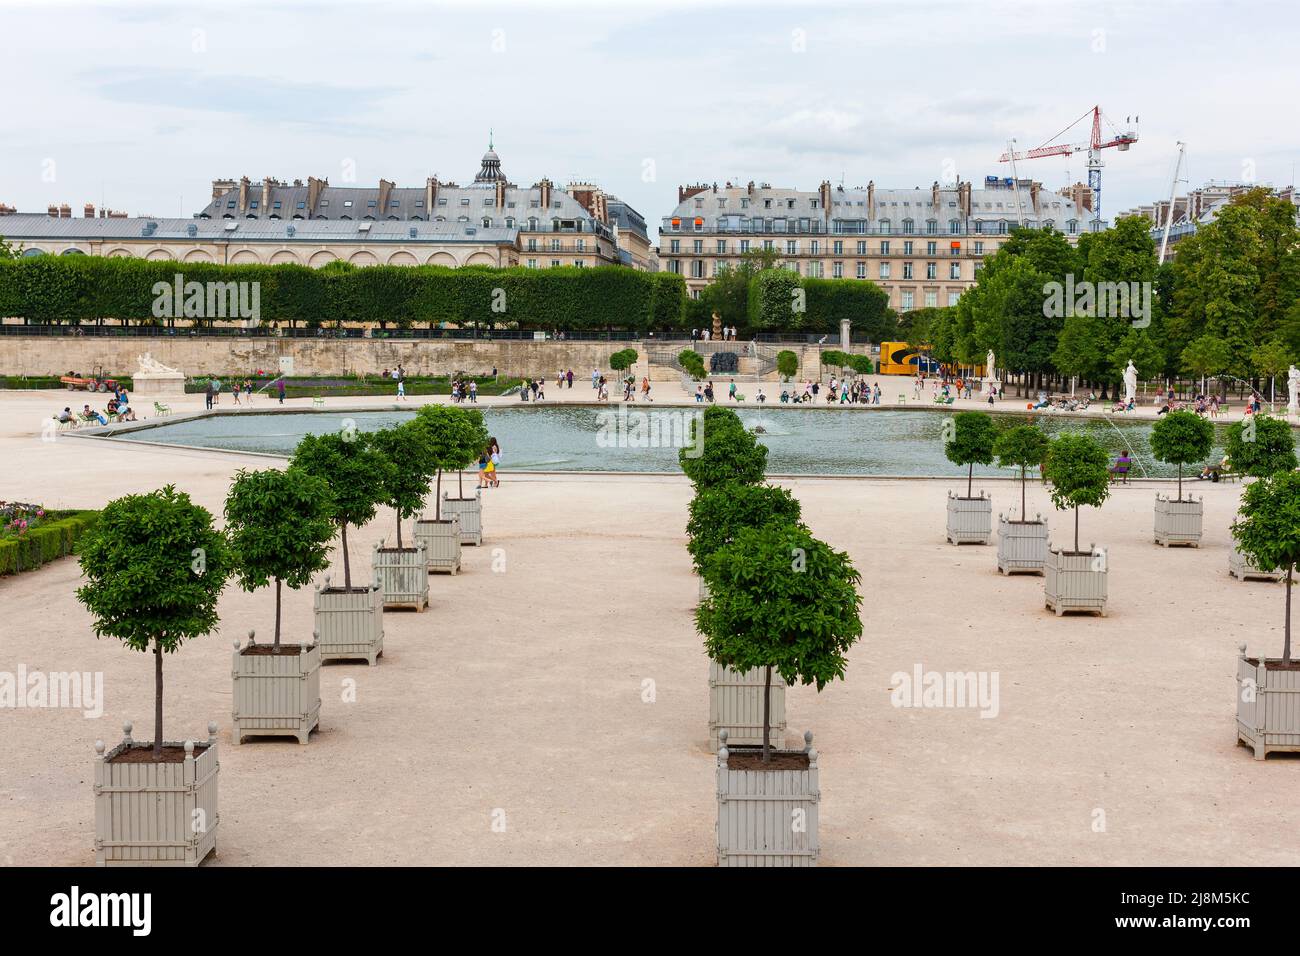 Paris, France - July 21, 2010 : Jardin des Tuileries and Bassin Octagonal. Tuileries Garden containing an eight sided pond. Stock Photo